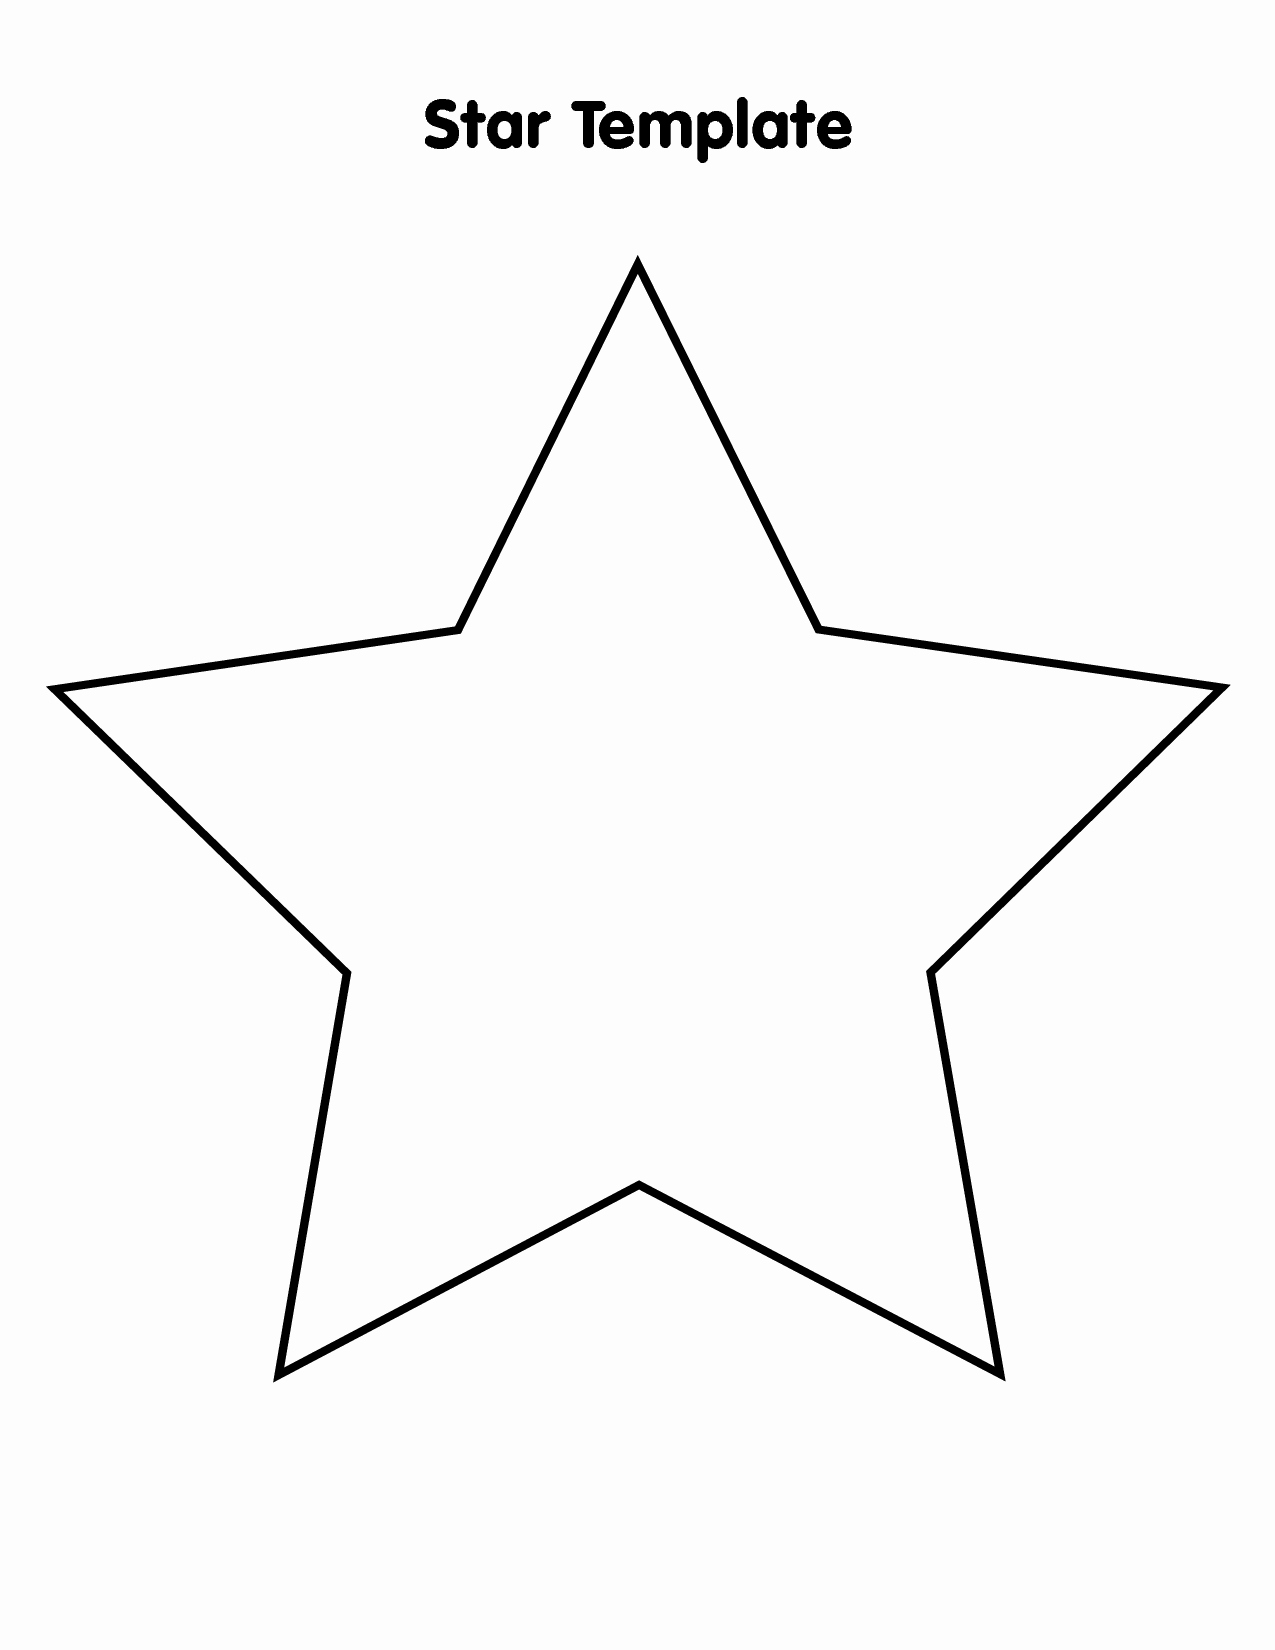 Star Stencil Printable Inspirational Free Star Template Download Free Clip Art Free Clip Art